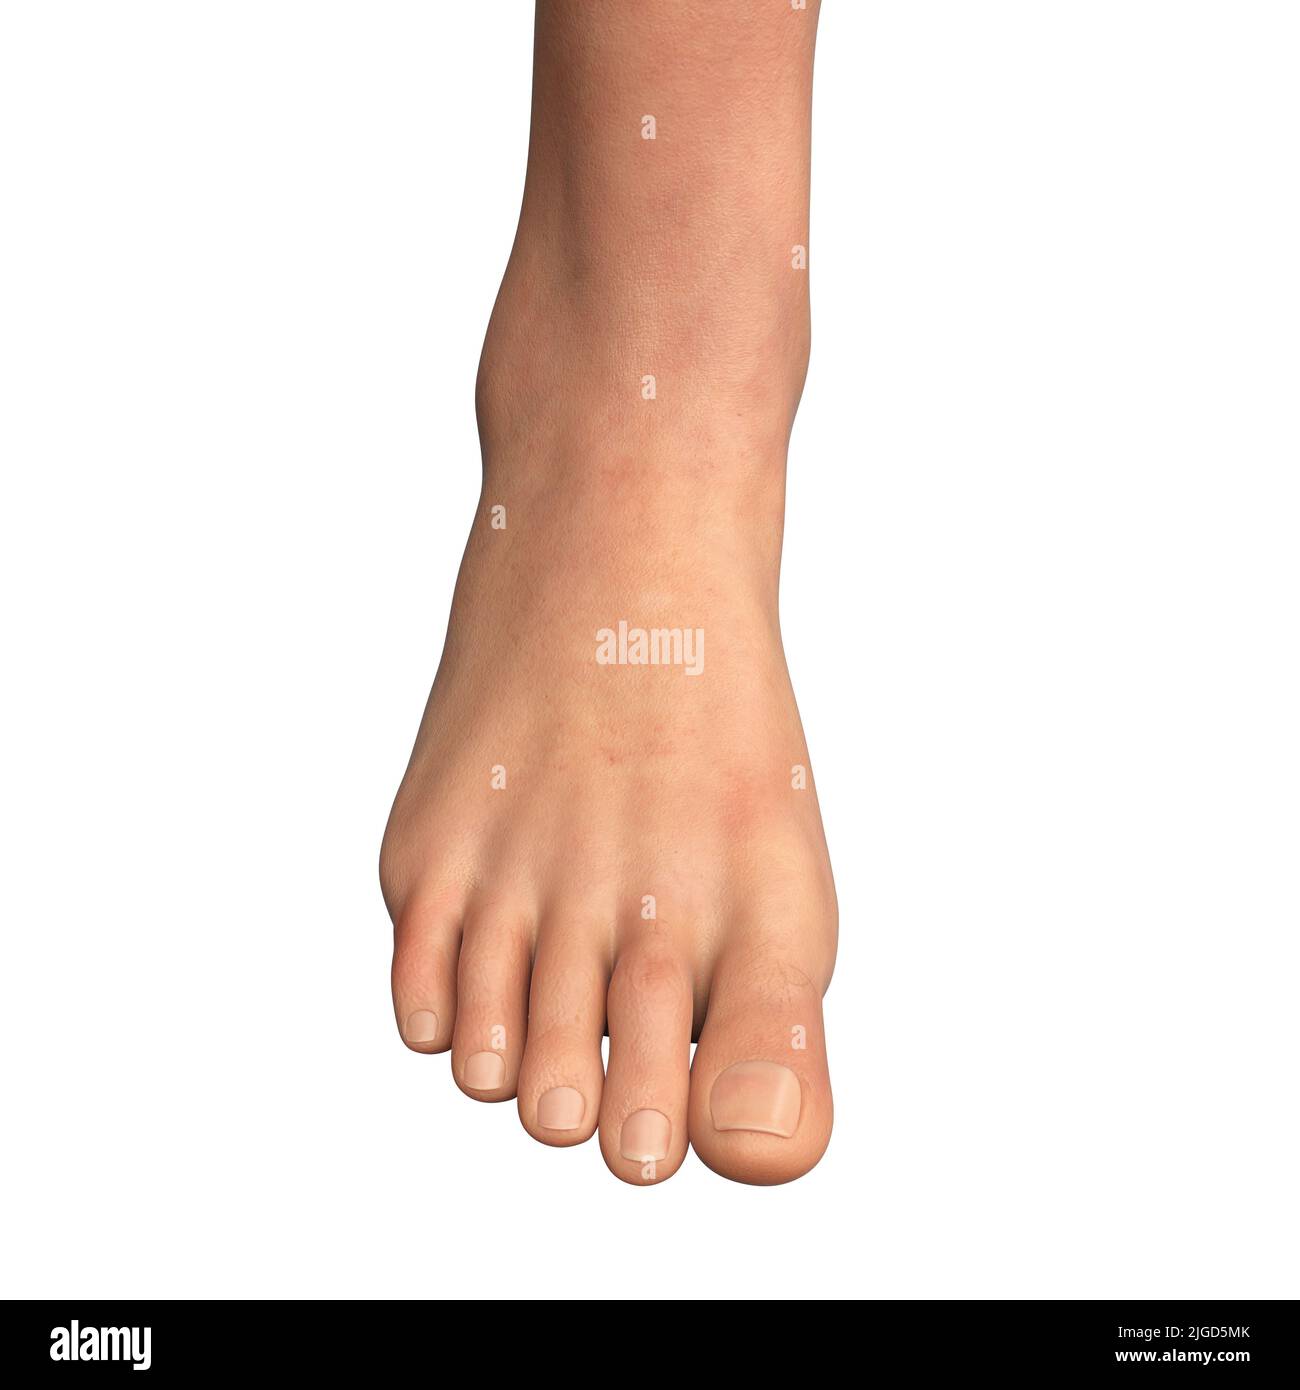 Woman's foot and ankle, illustration Stock Photo